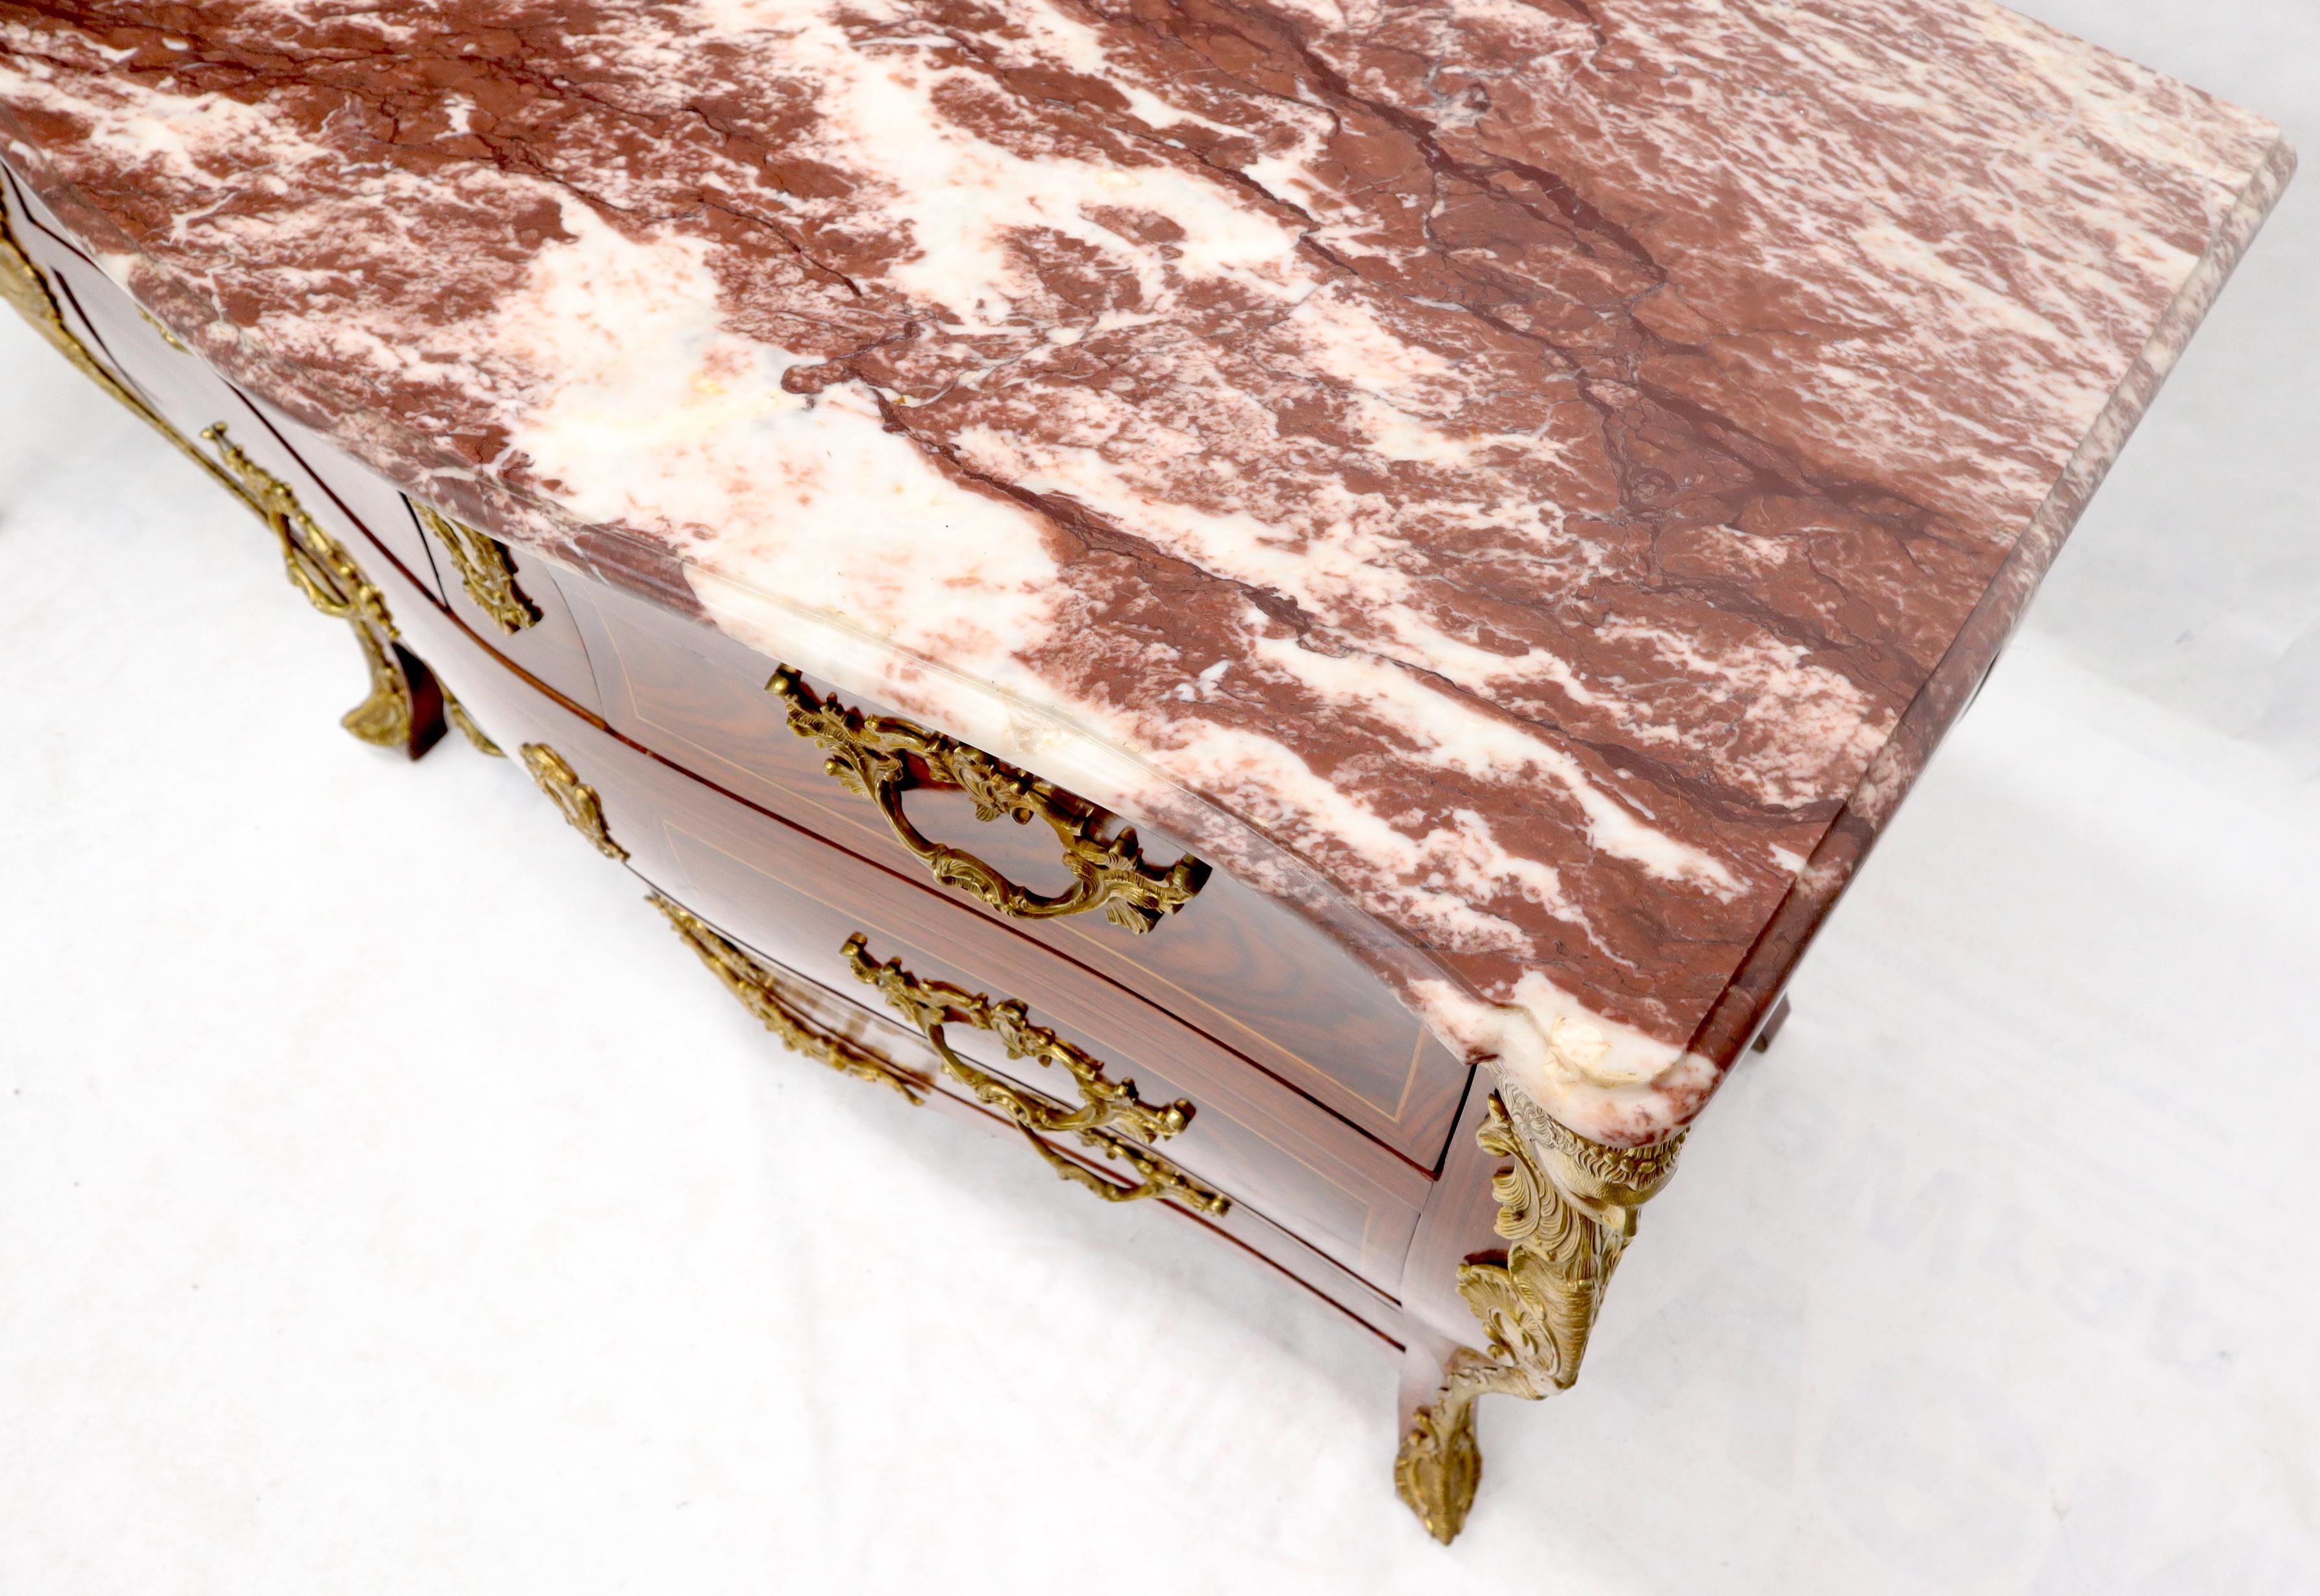 Stunning rouge marble top French inlayed wood dresser with significant bronze ormolu. Very nice decorative piece.